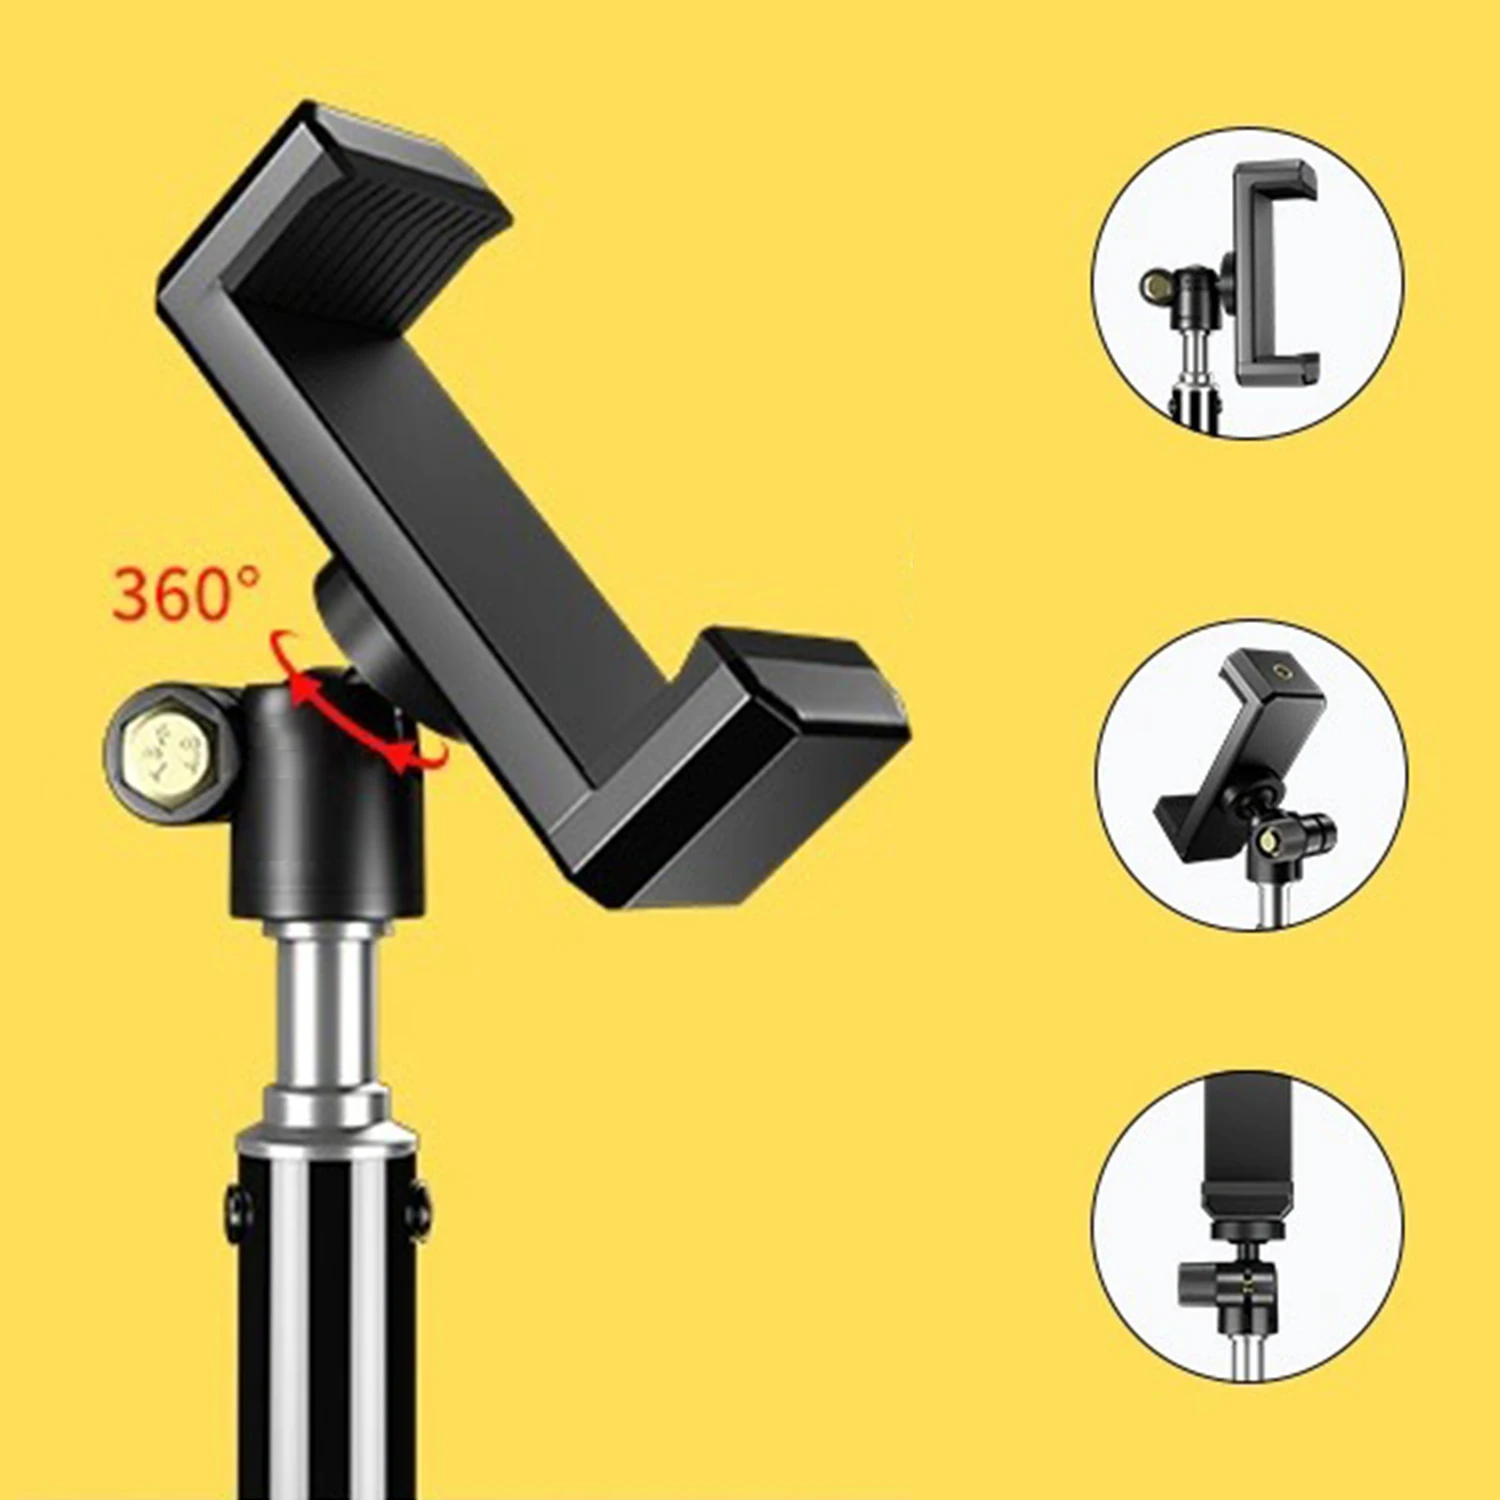 photography tripod mobile phone camera selfie bracket for youtube video live broadcast metal stand retractable folding support free global shipping